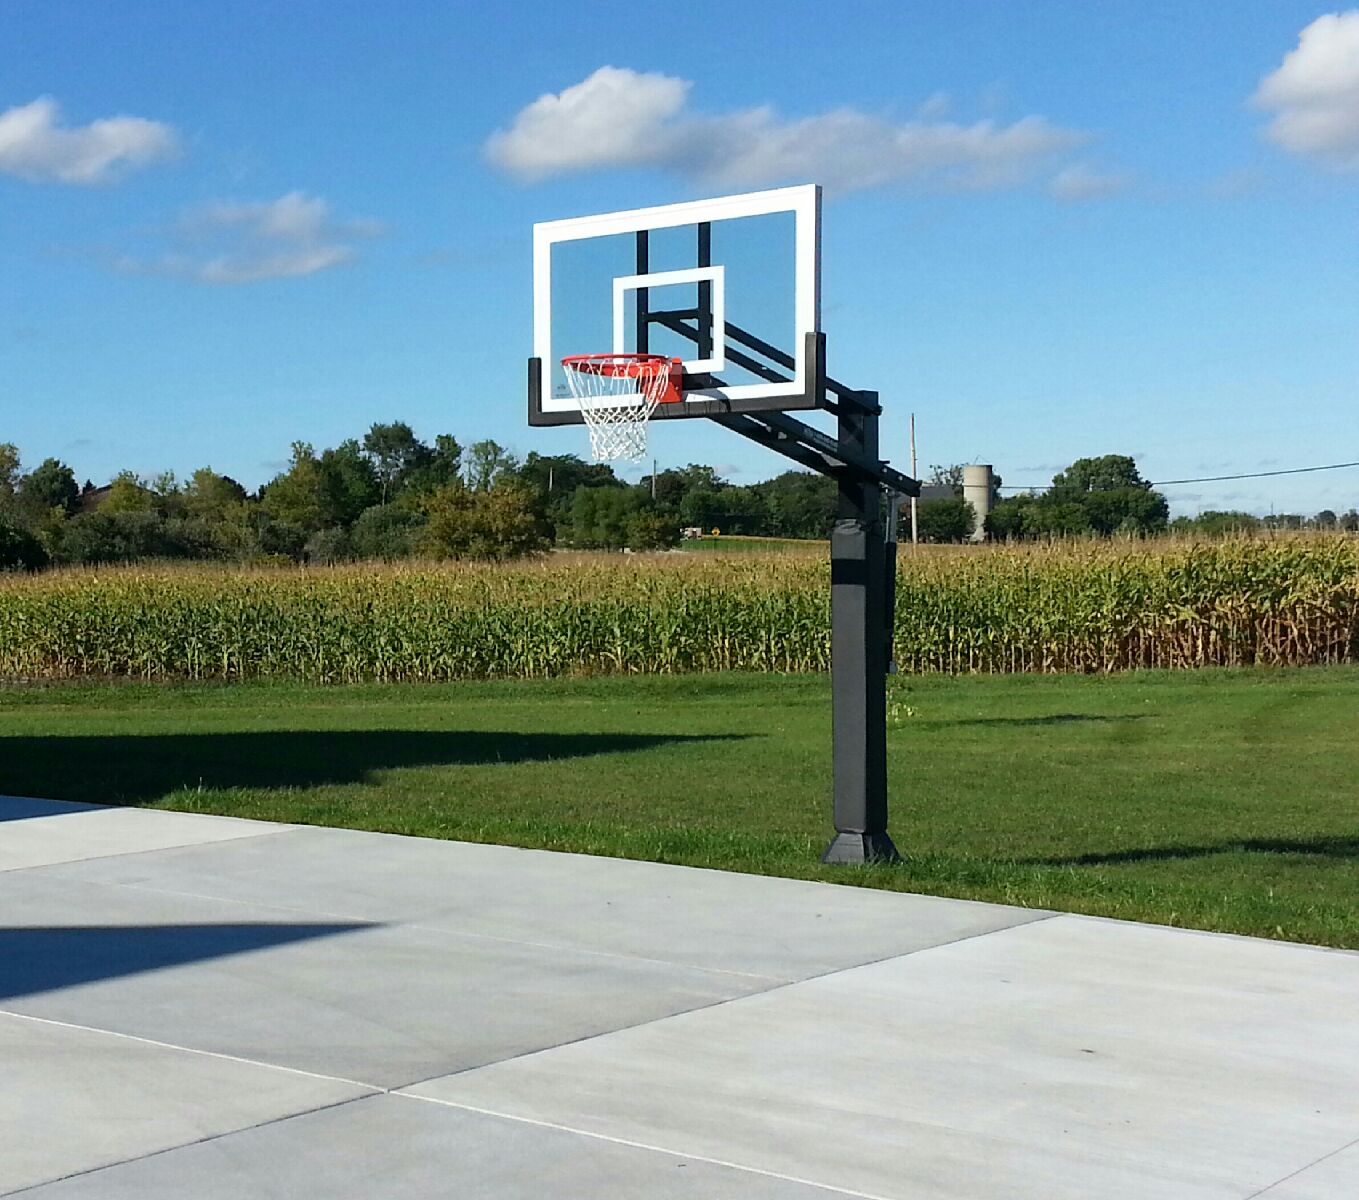 Pro Dunk Gold Basketball System is pretty awesome for farmers too!